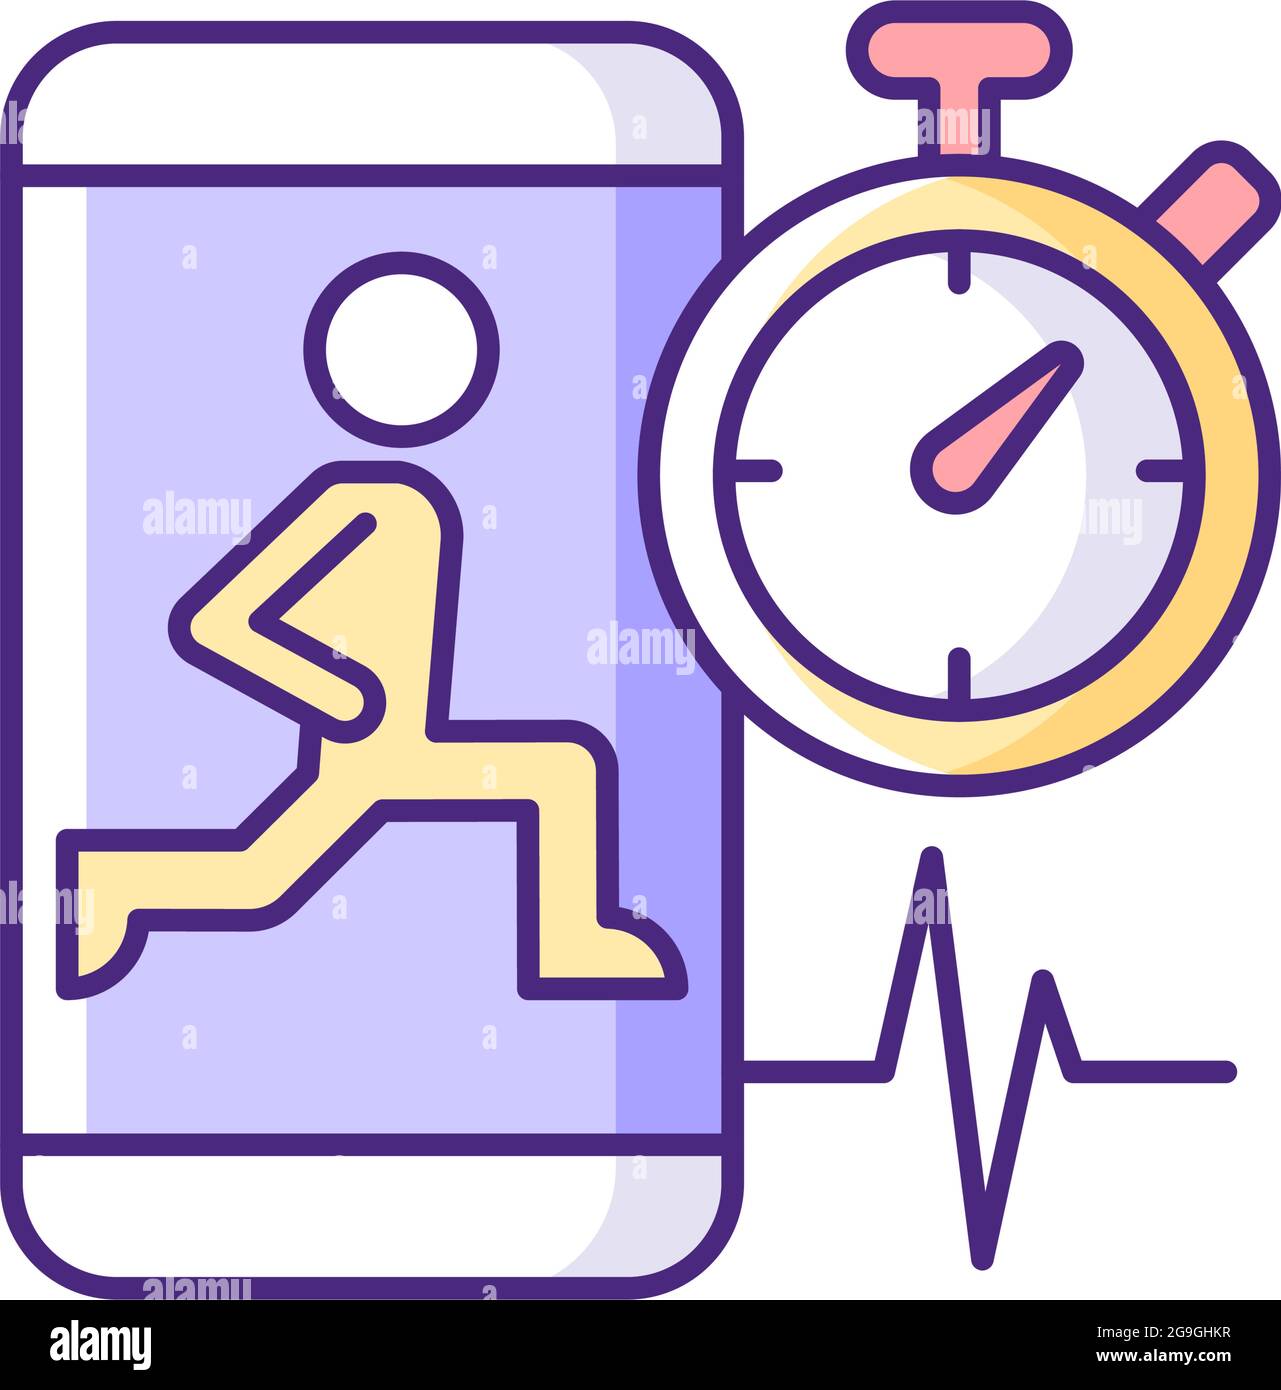 High intensity and intervals workout RGB color icon. Stock Vector